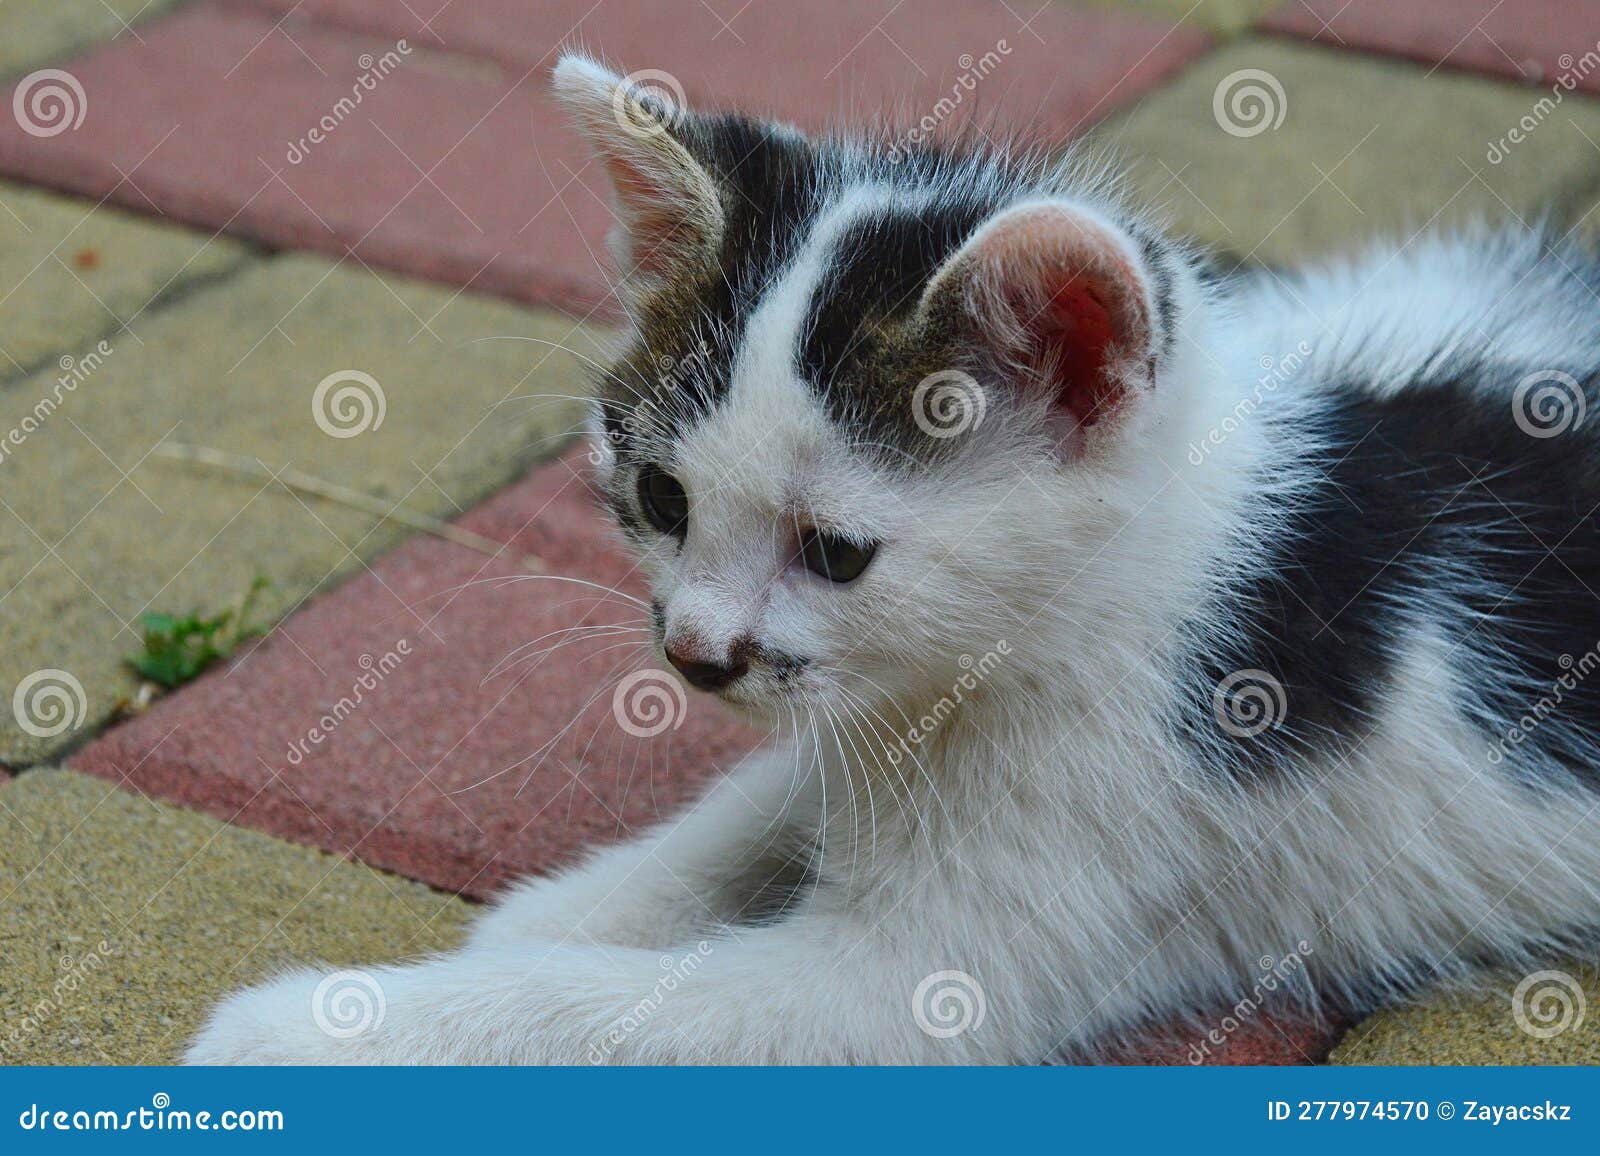 cute bicolor male kitten called poirot after his hercules poirot moustache like color patch around the nose